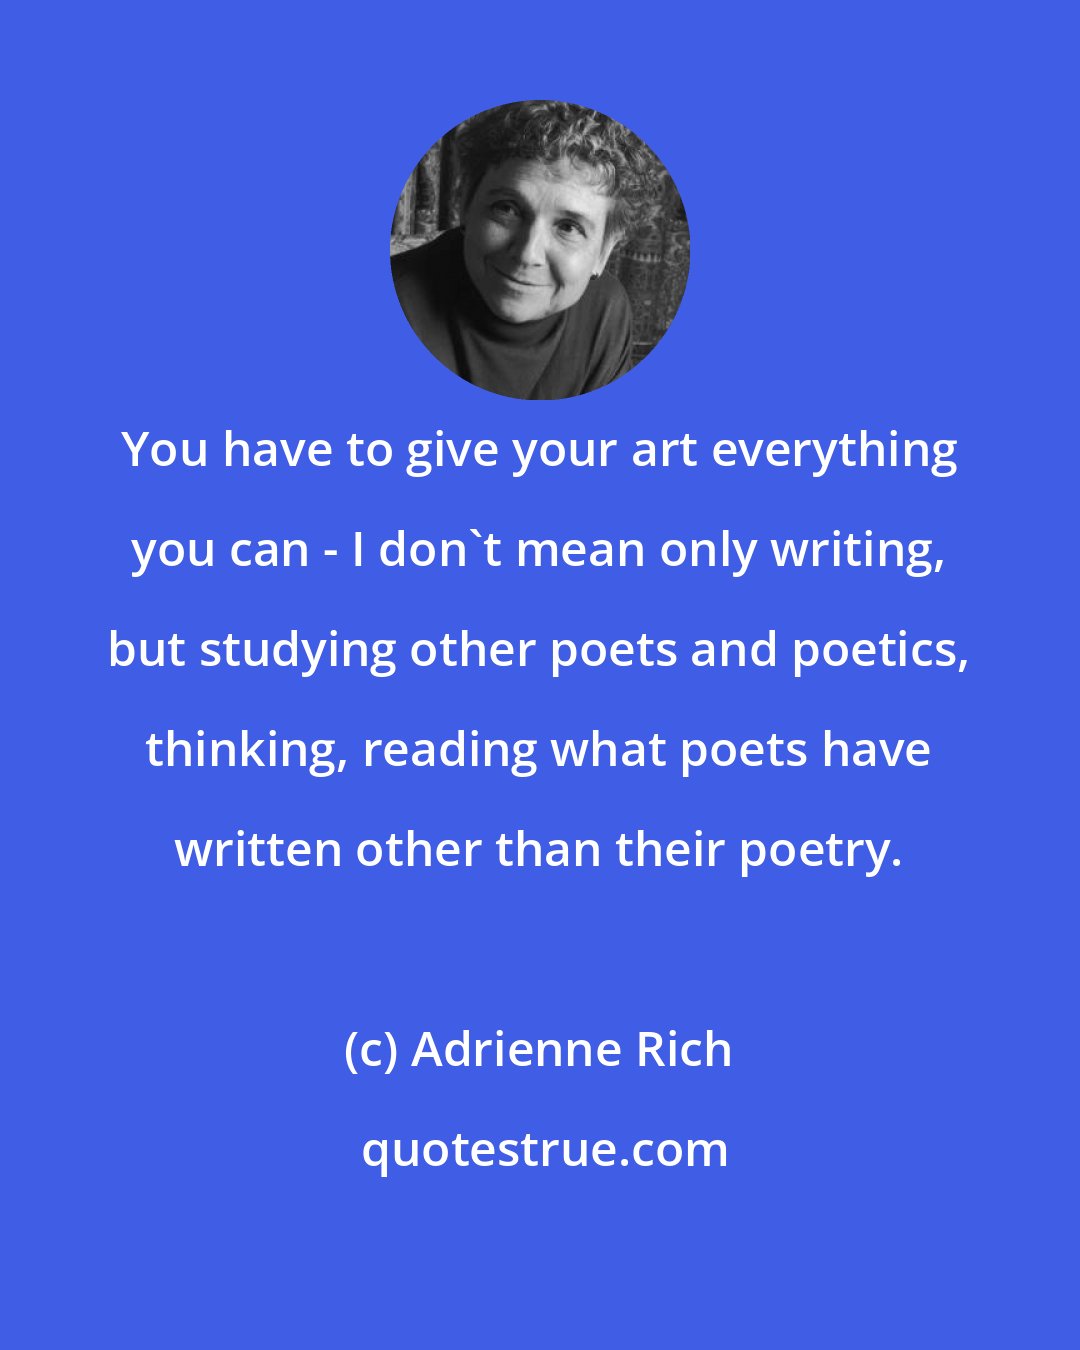 Adrienne Rich: You have to give your art everything you can - I don't mean only writing, but studying other poets and poetics, thinking, reading what poets have written other than their poetry.